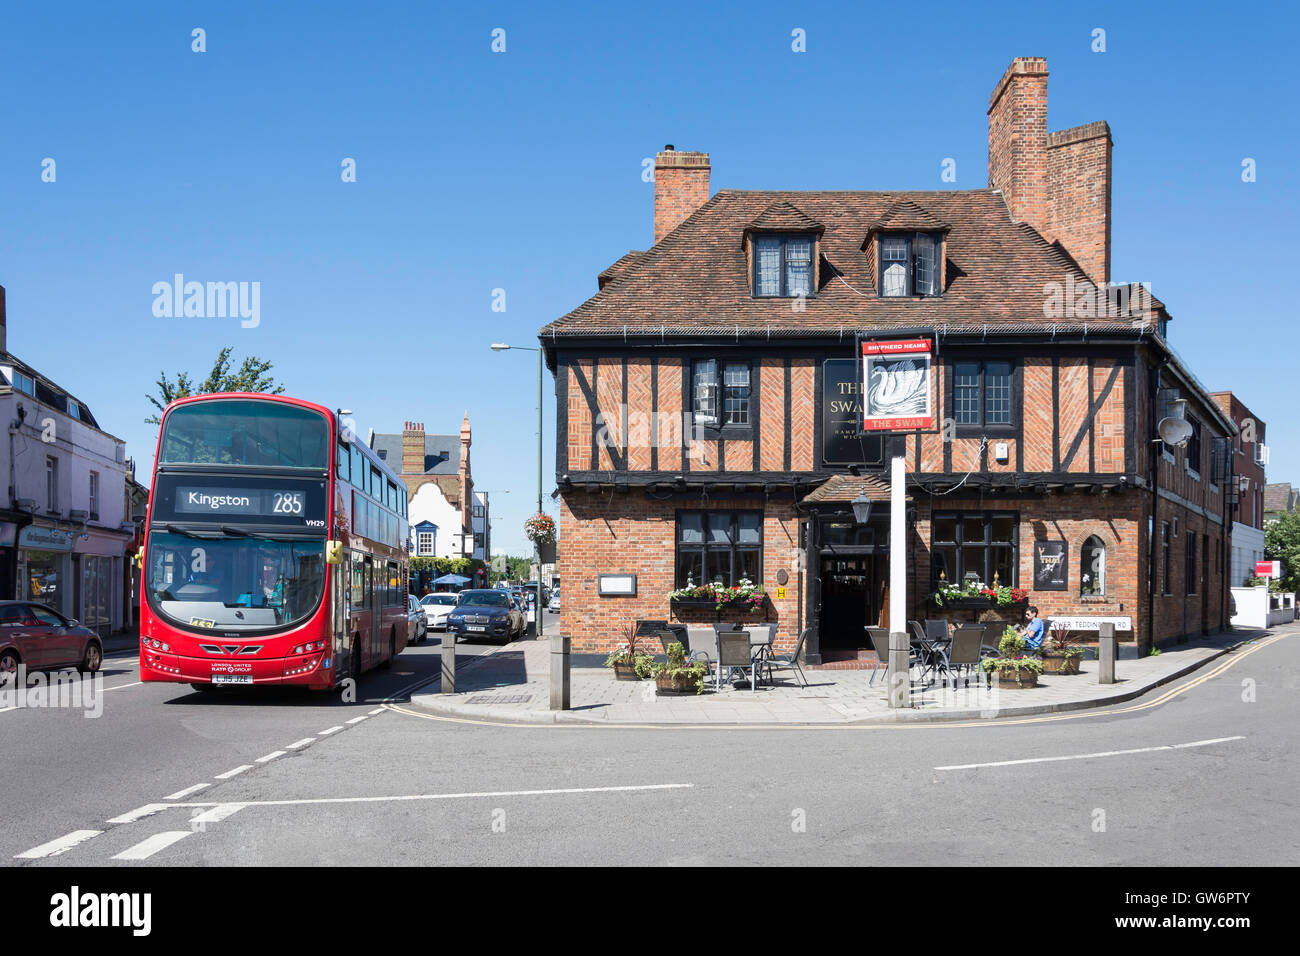 The Swan Pub on High Street, Hampton Wick, Royal Borough of Richmond upon Thames, Greater London, Angleterre, Royaume-Uni Banque D'Images